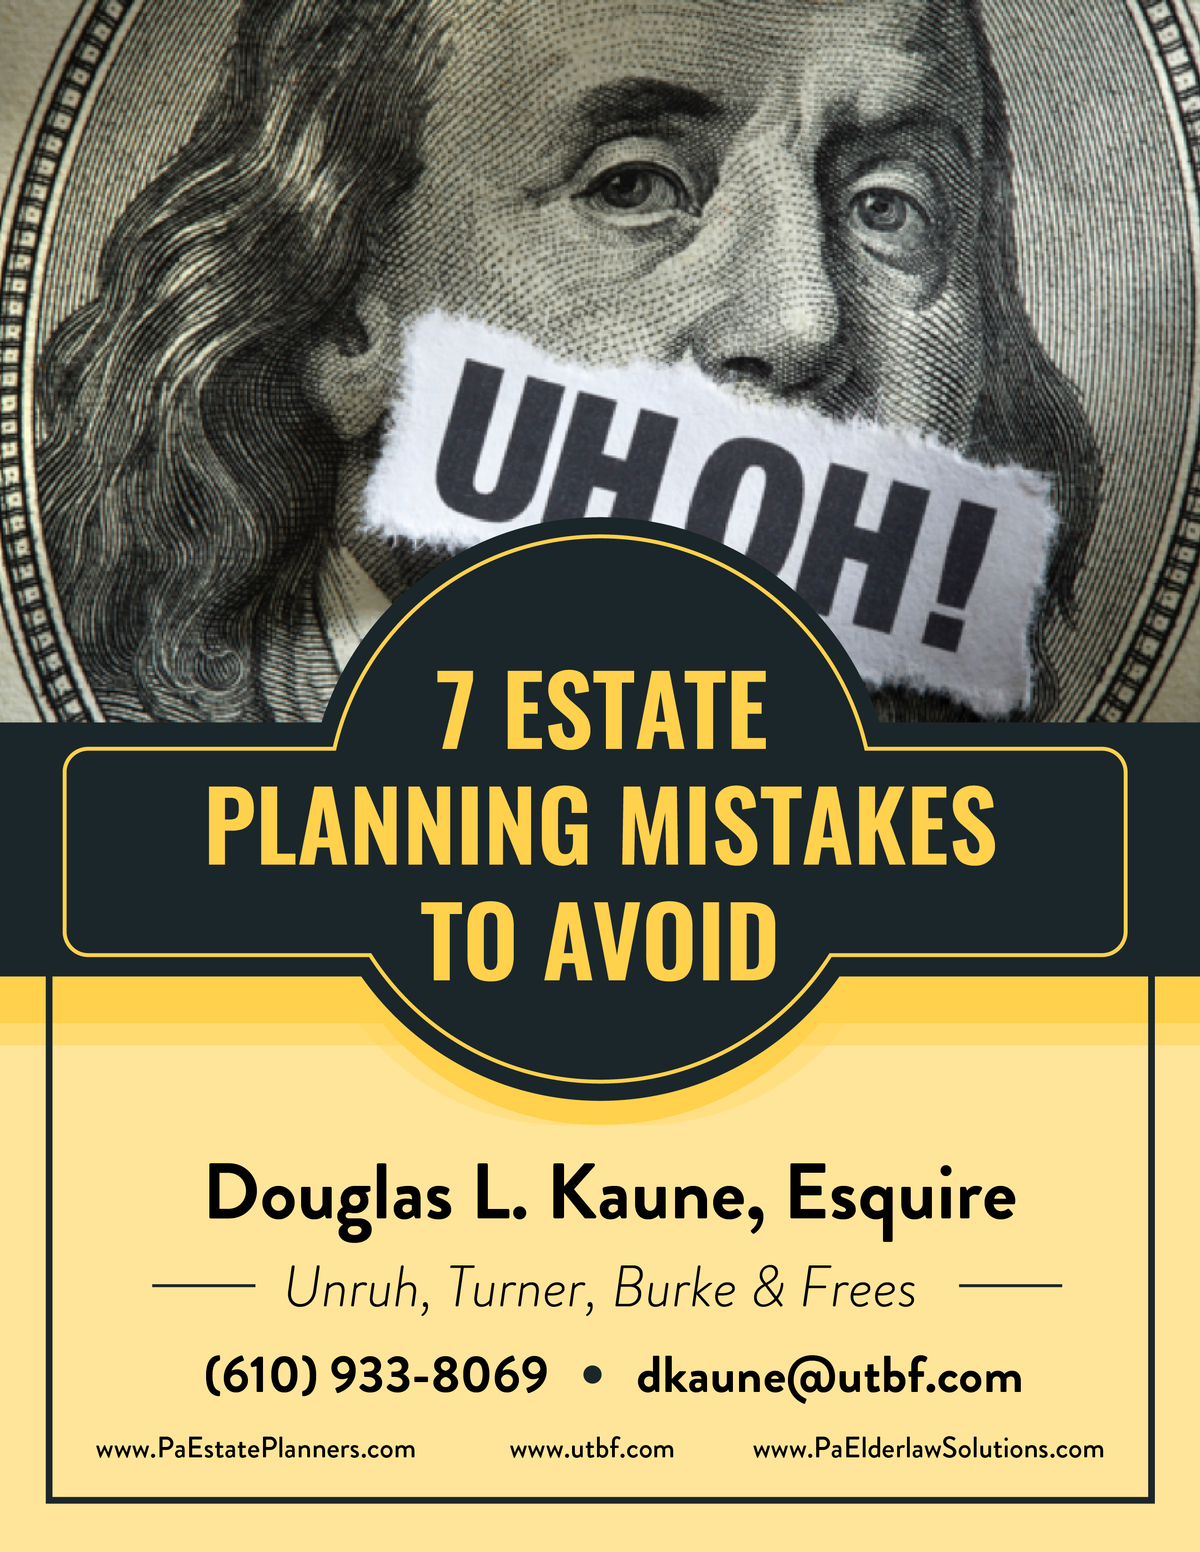 7 Estate Planning Mistakes to Avoid